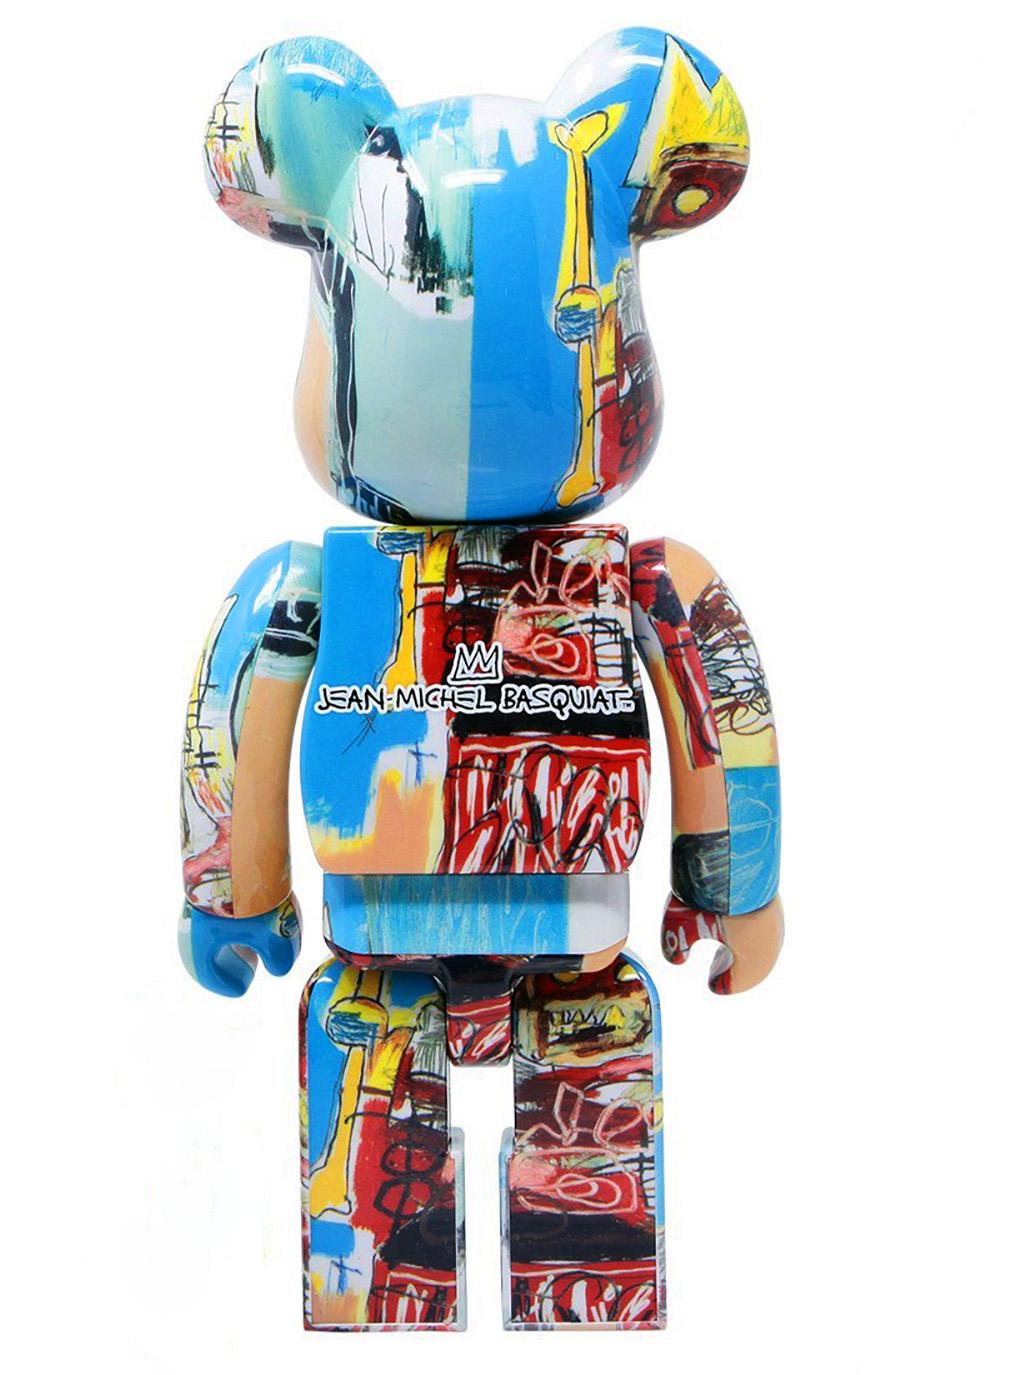 Basquiat Bearbrick 400% (set of 2 Basquiat BE@RBRICK) - Gray Abstract Sculpture by after Jean-Michel Basquiat